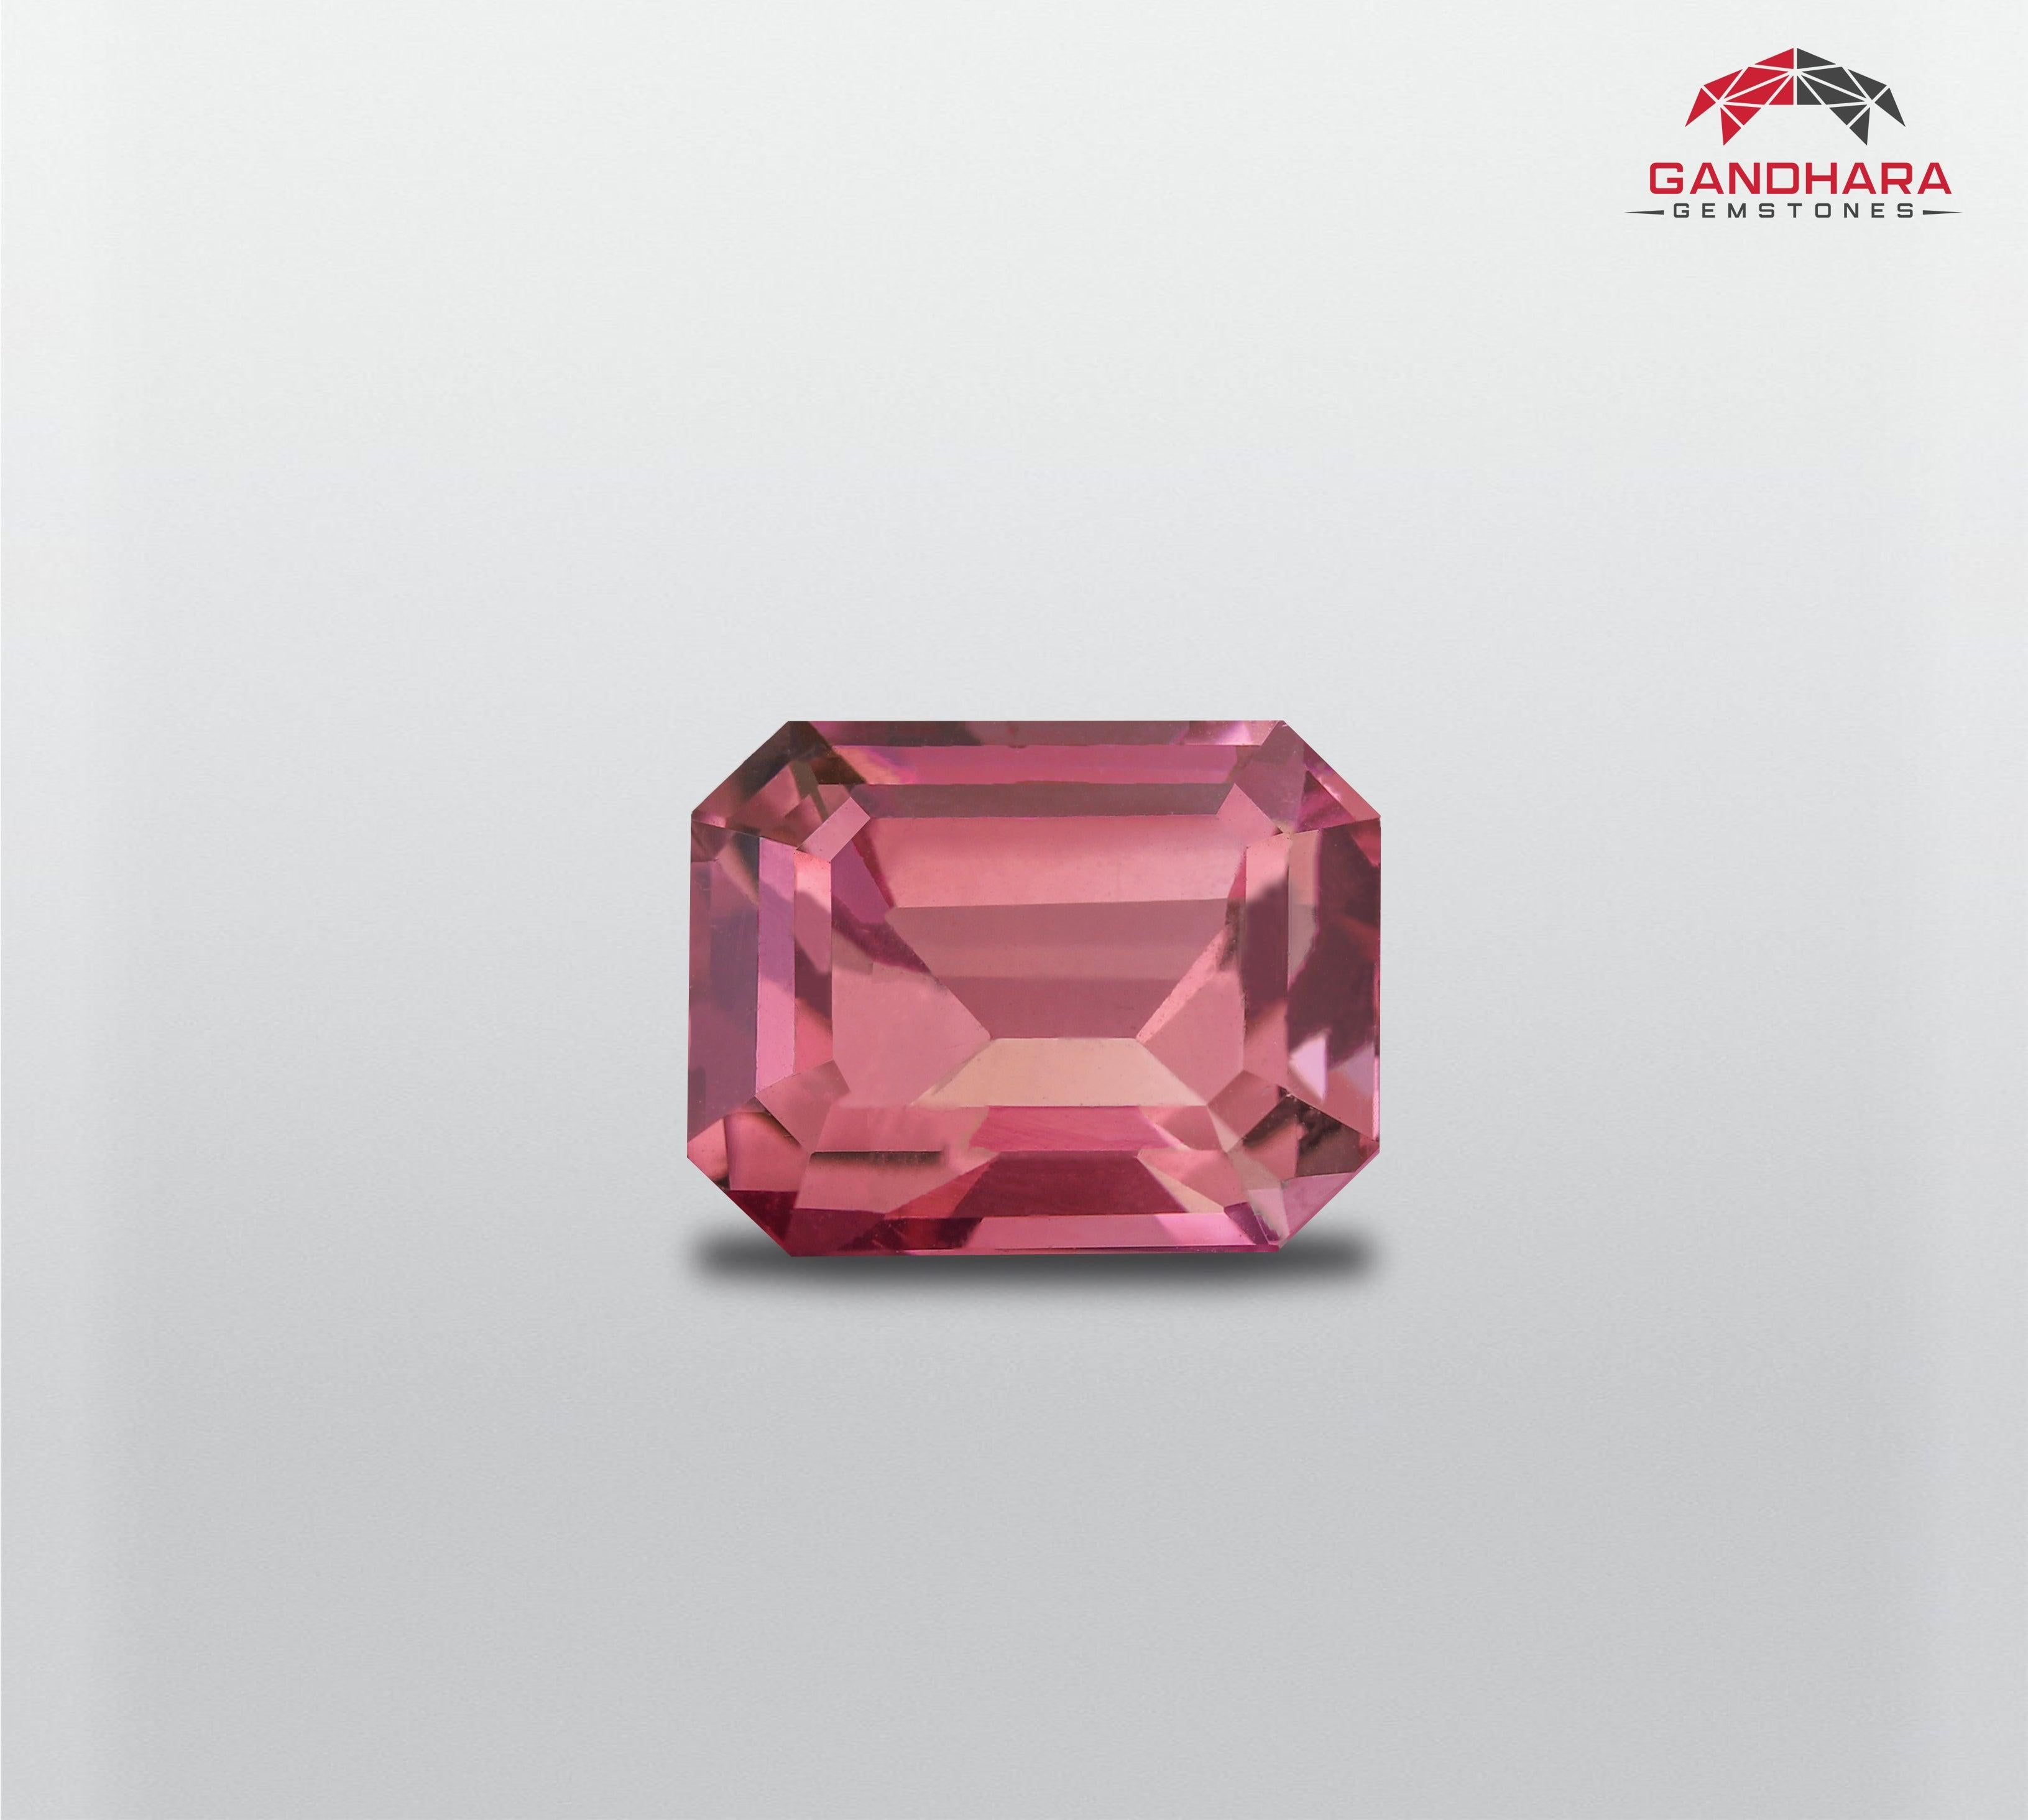 Sweet Pink Natural Loose Tourmaline, available for sale at wholesale price, natural high-quality, 2.31 carats Loose certified tourmaline gemstone from Afghanistan.

Product Information:
GEMSTONE TYPE	Sweet Pink Natural Loose Tourmaline
WEIGHT	2.31